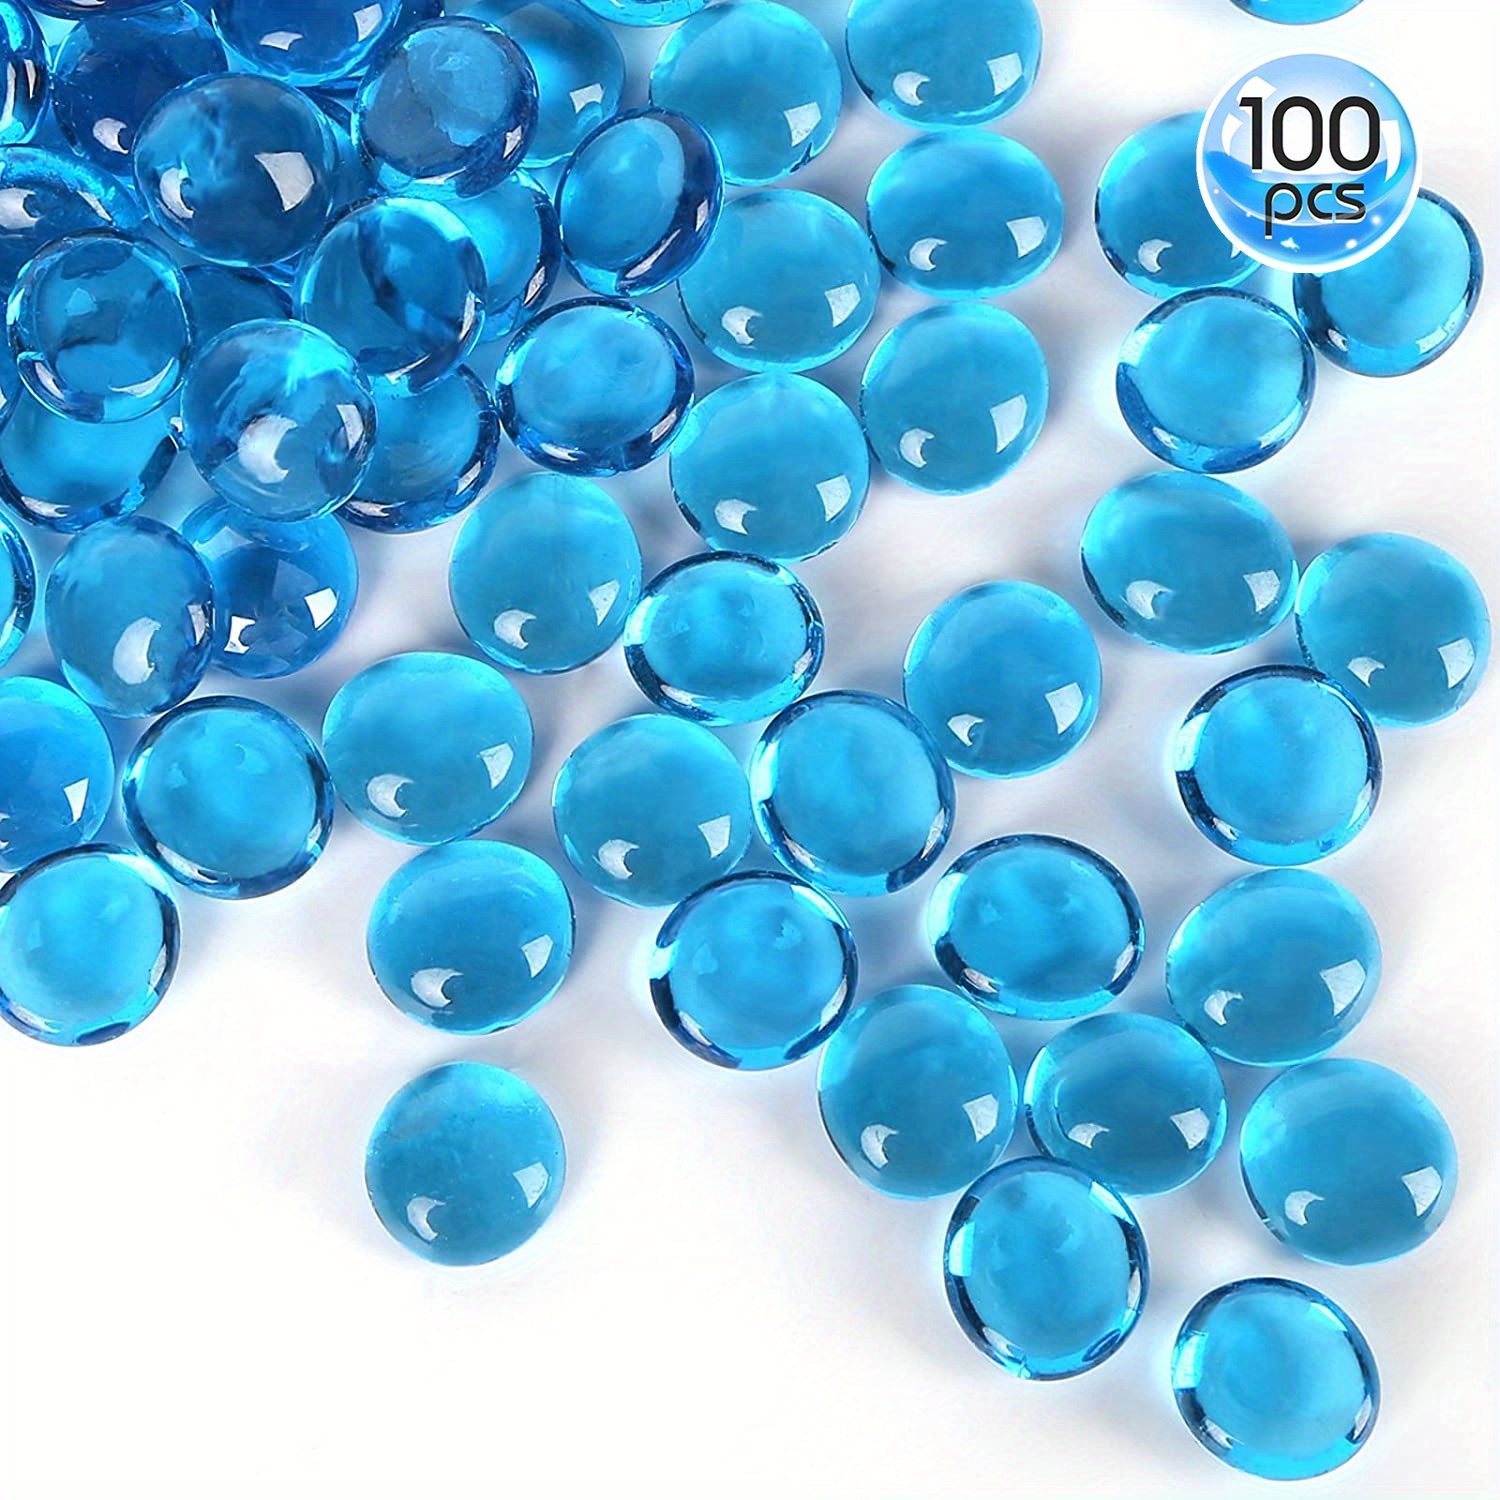 M70M 25-bags Mixed Glass Marbles -- FREE SHIPPING 